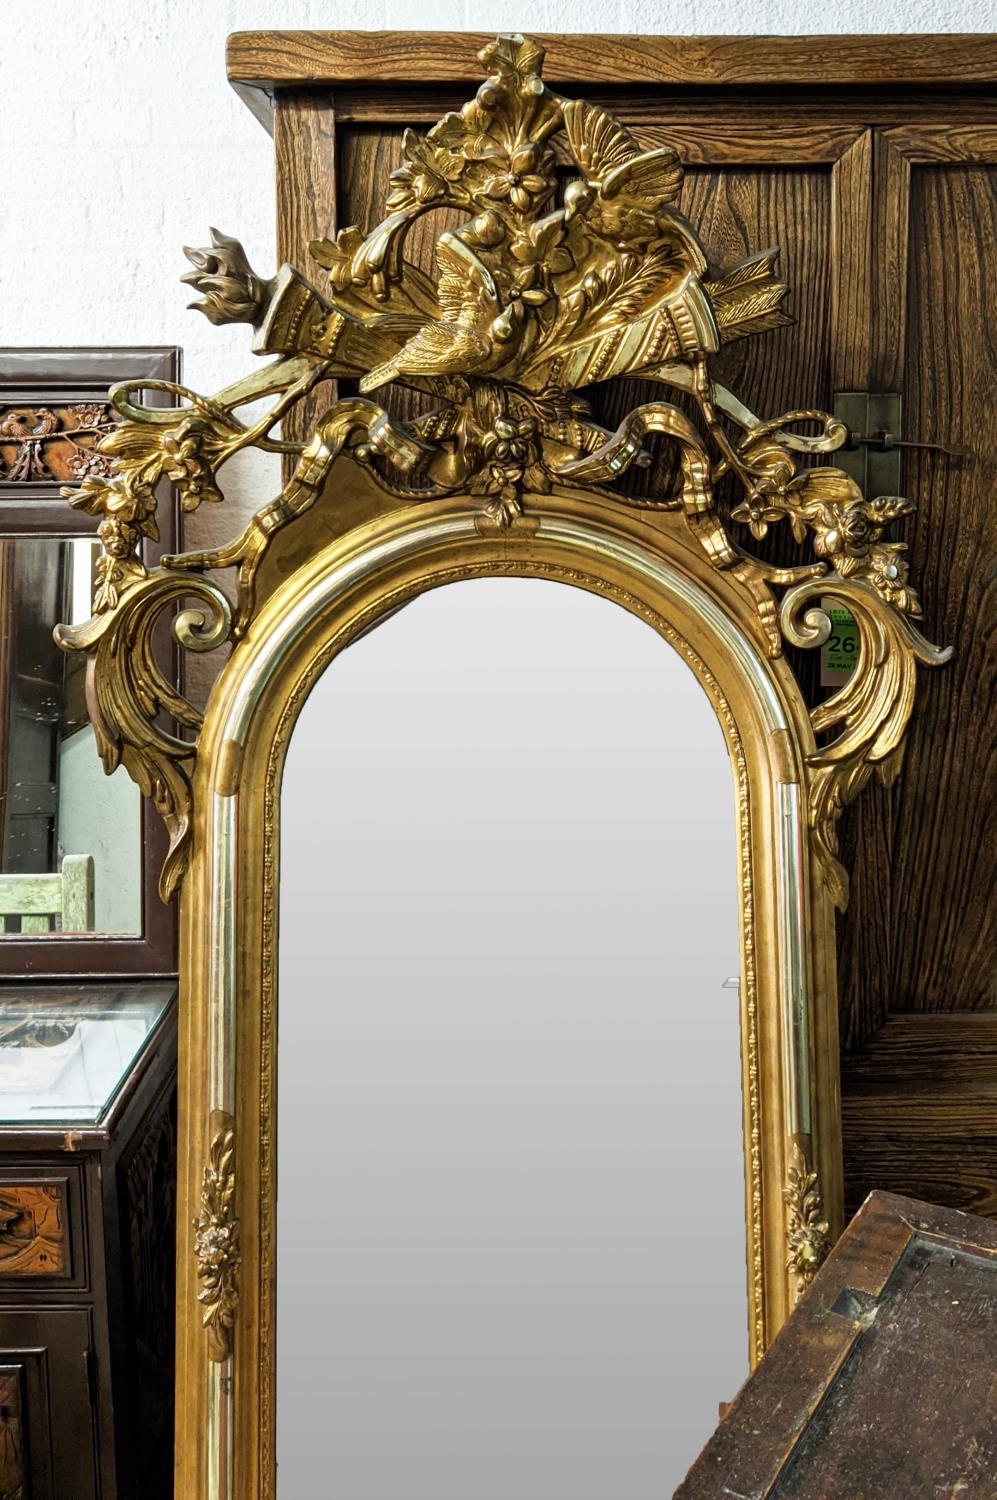 WALL MIRROR, 95cm W x 194cm H mid 19th century Continental giltwood with torch and quiver, bird - Image 2 of 7